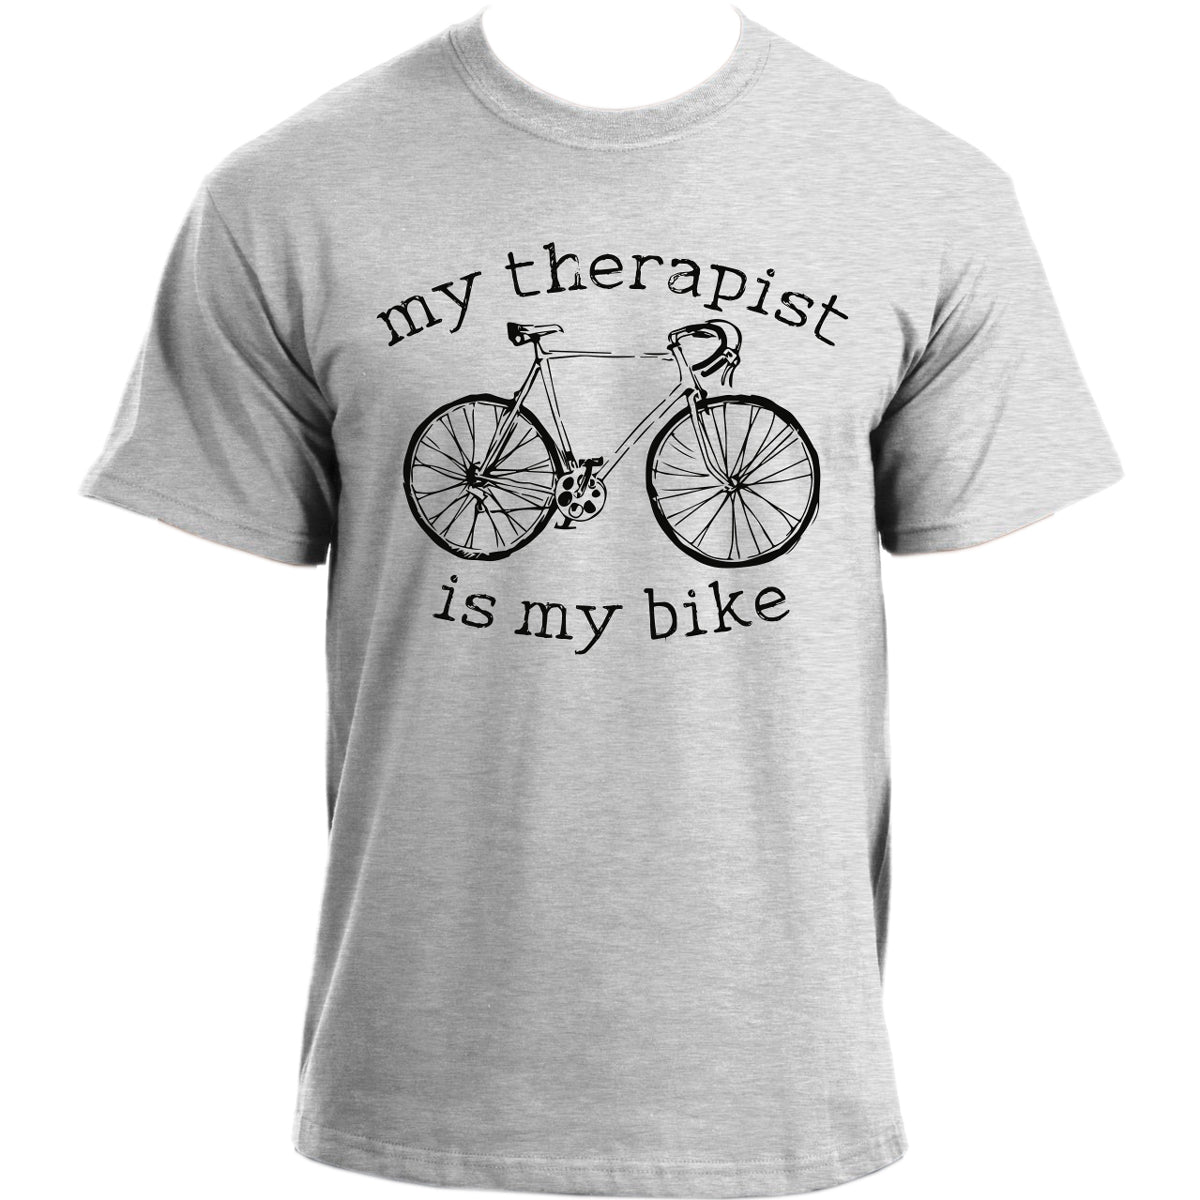 My Therapist Is My Bike T-Shirt I Cycling Top I Bicycle Tee Sports Cyclist Tshirt For Men